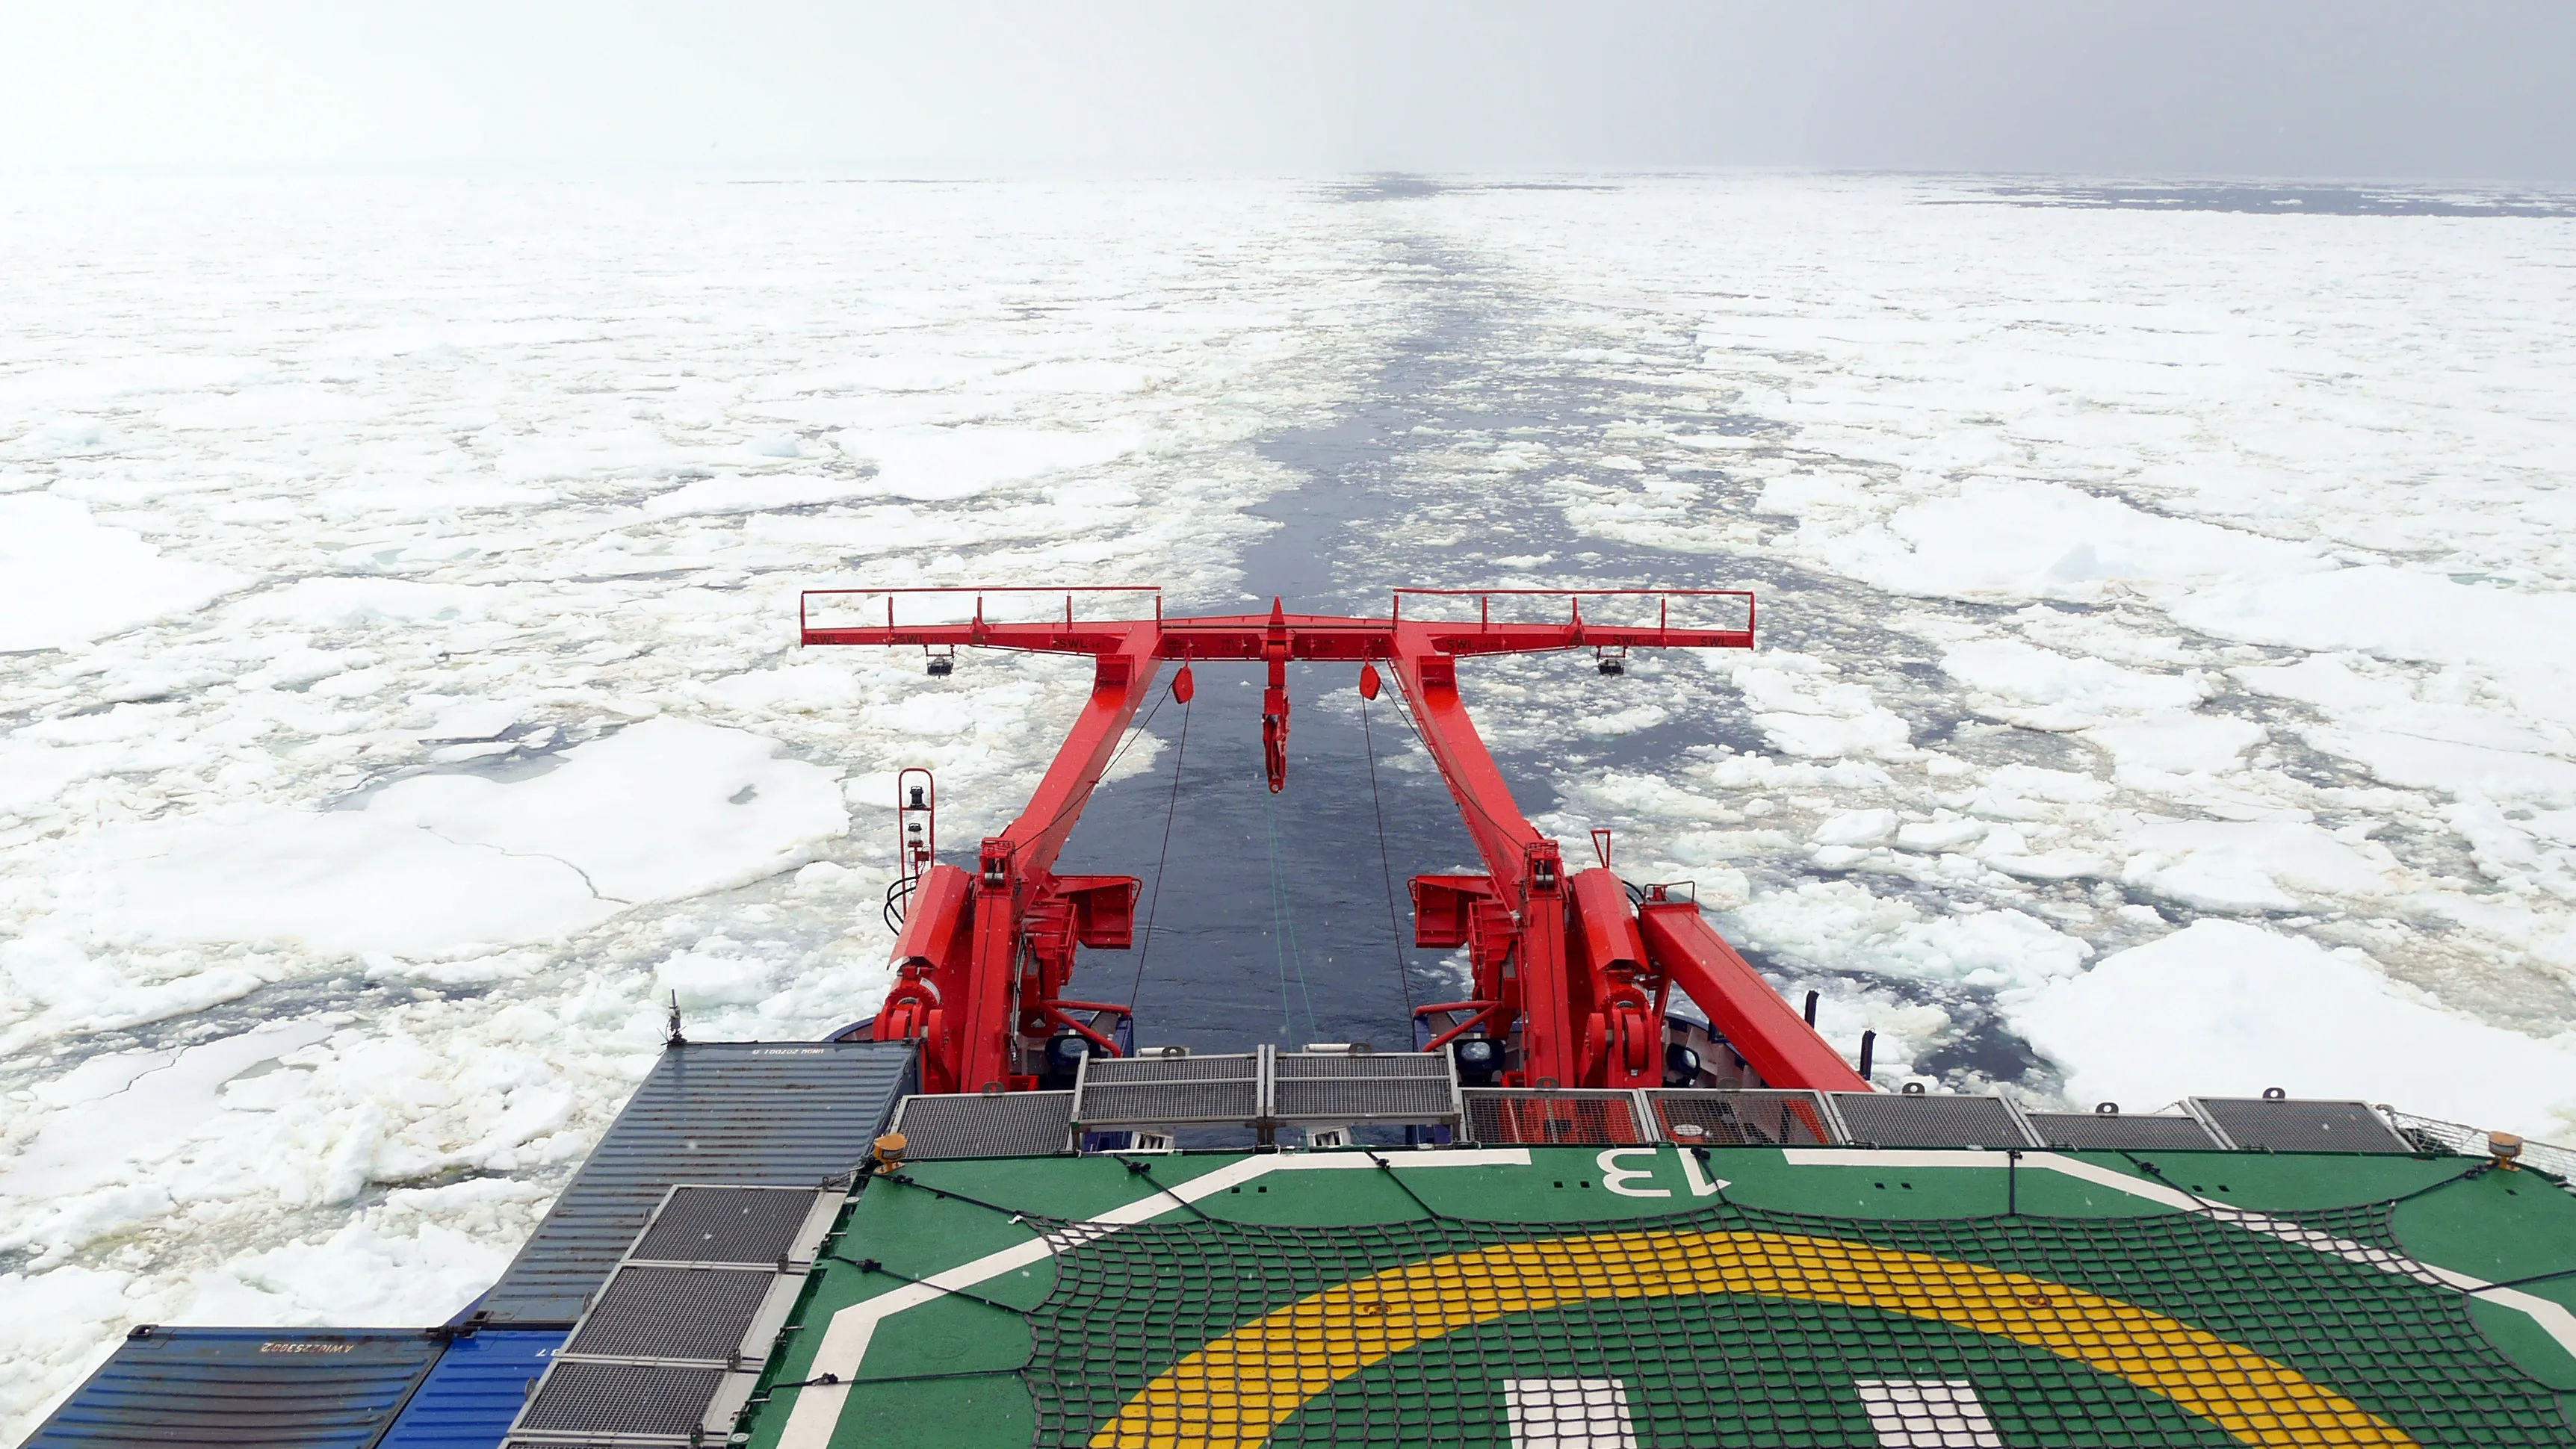 A line of clear water through sea ice, viewed from the stern of the ship, just visible.